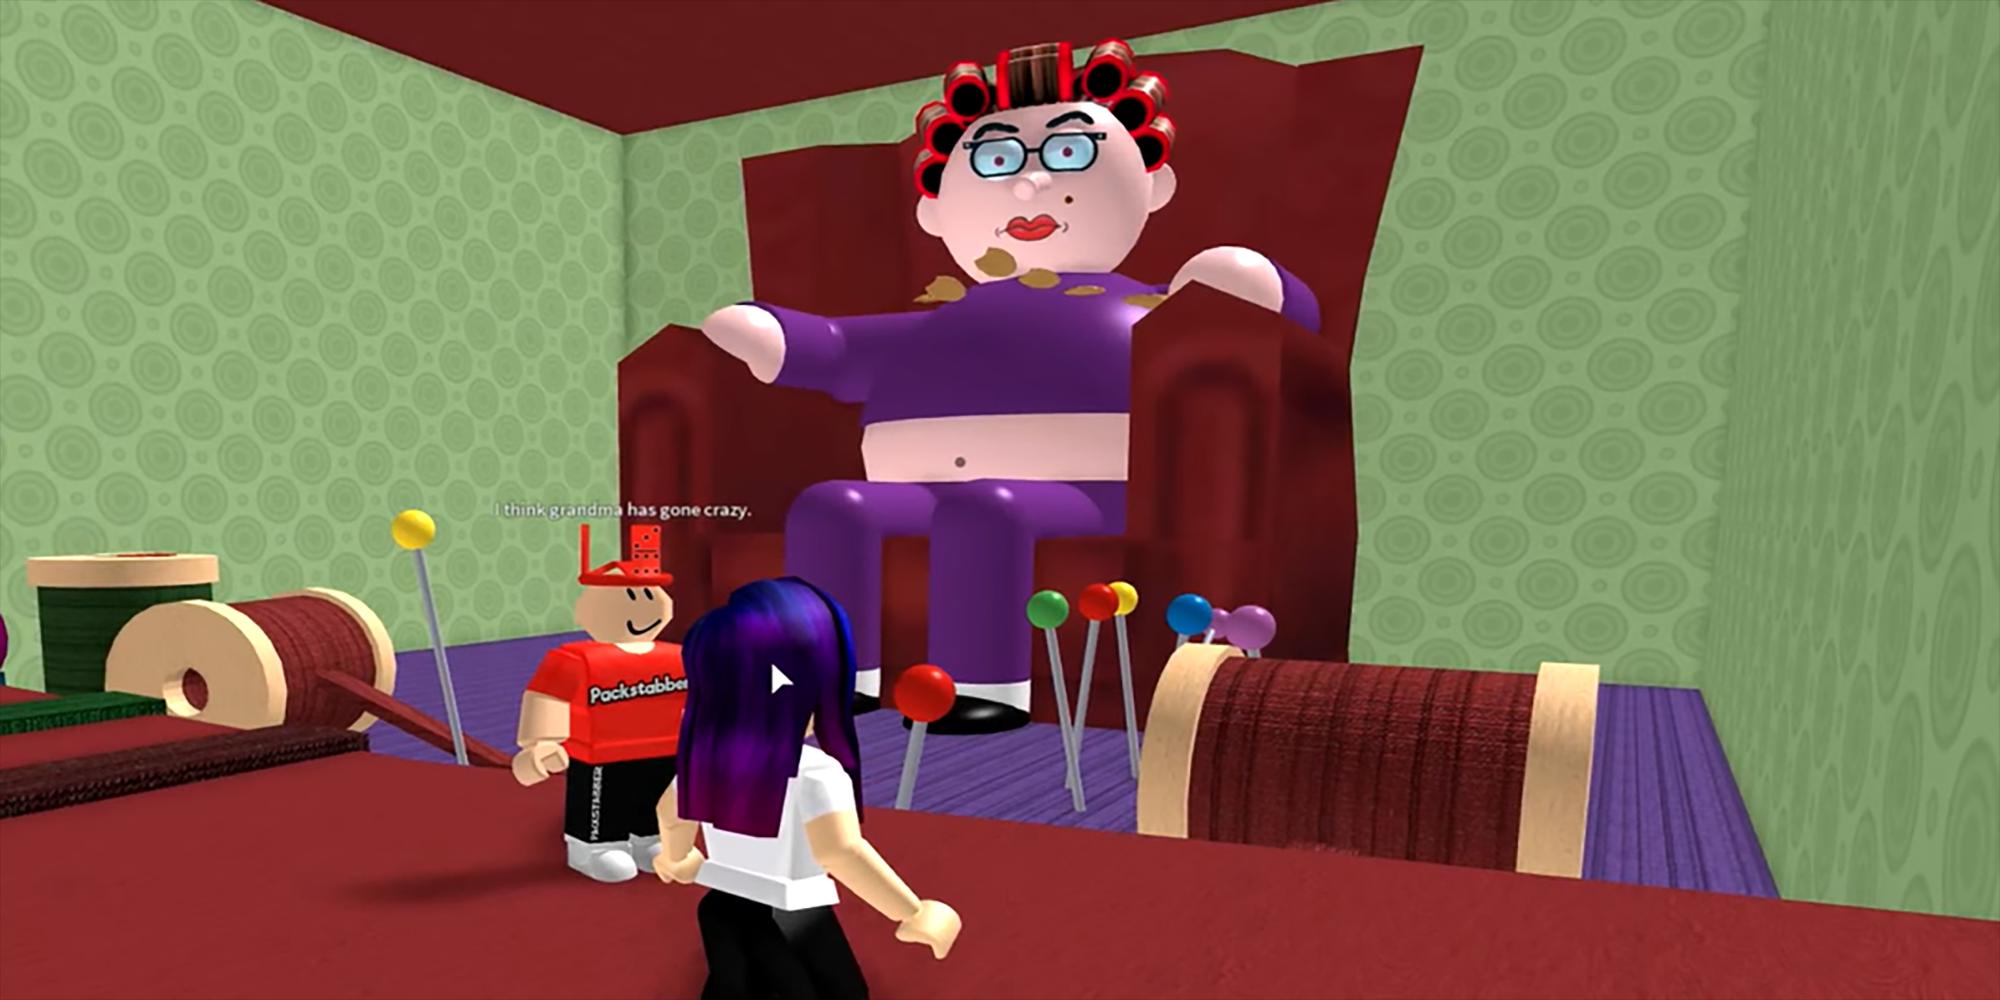 Escape Grandma S House Obby Guide For Android Apk Download - escape grandma s house roblox obby walkthrough for android apk